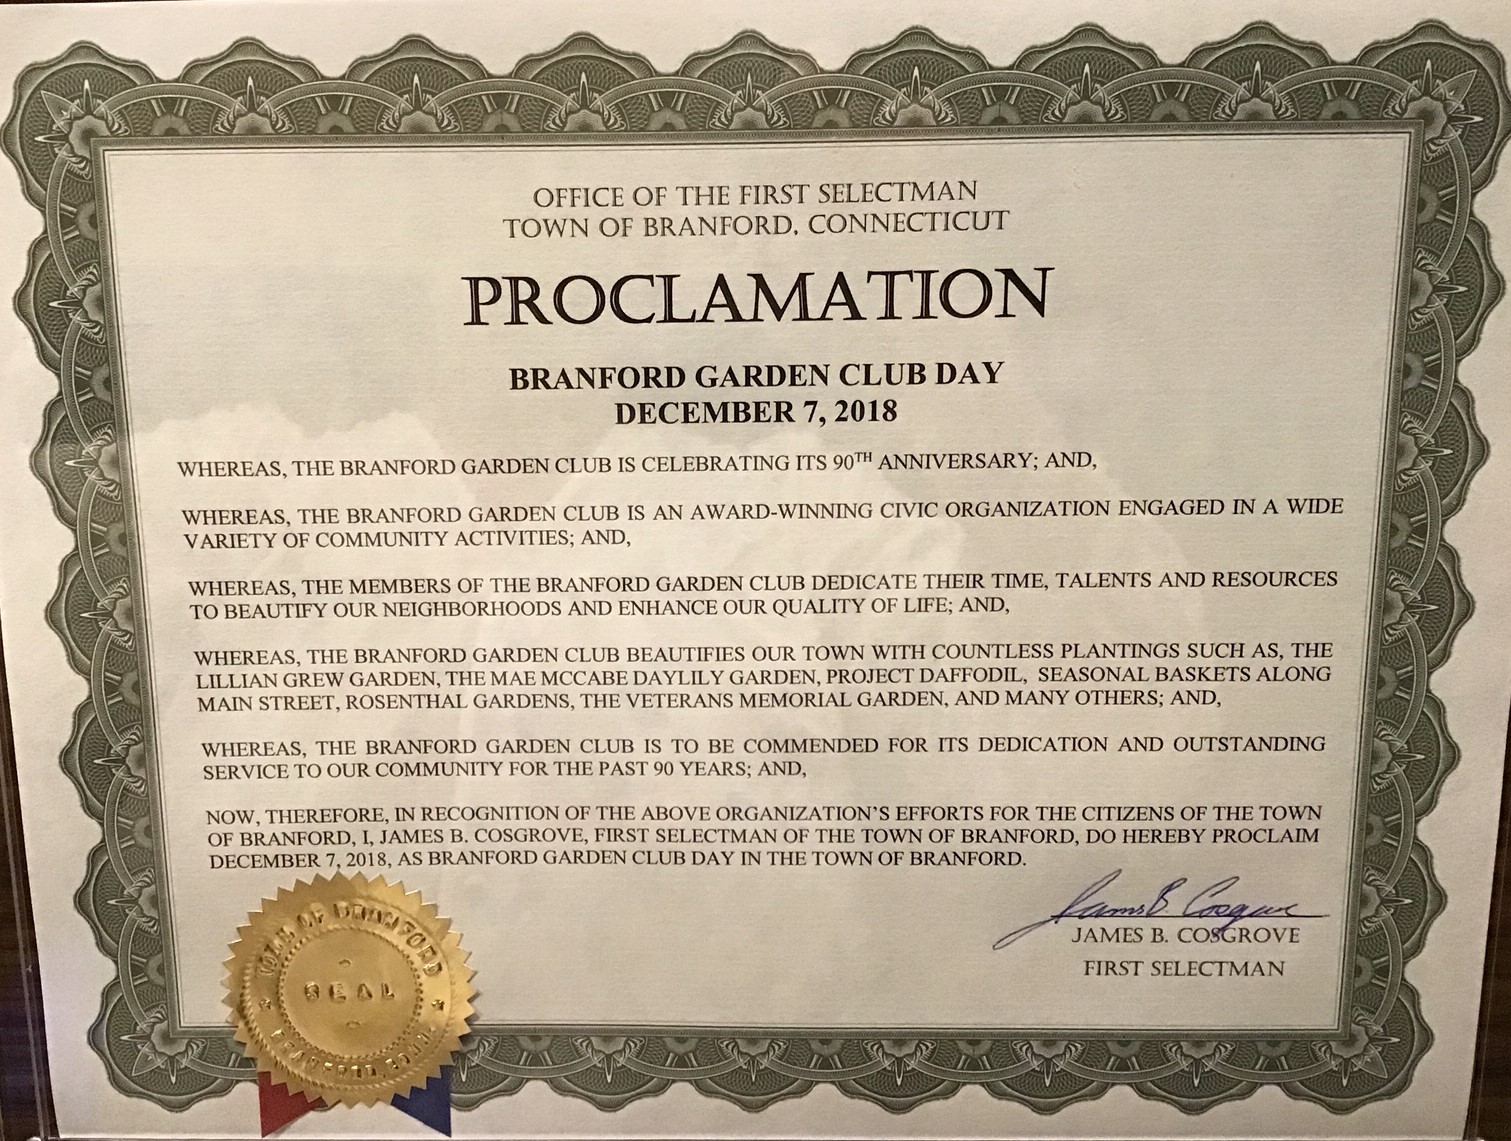 First Selectman, James B. Cosgrove, honored the Branford Garden Club by proclaiming December 7, 2018, as Branford Garden Club Day in the Town of Branford.